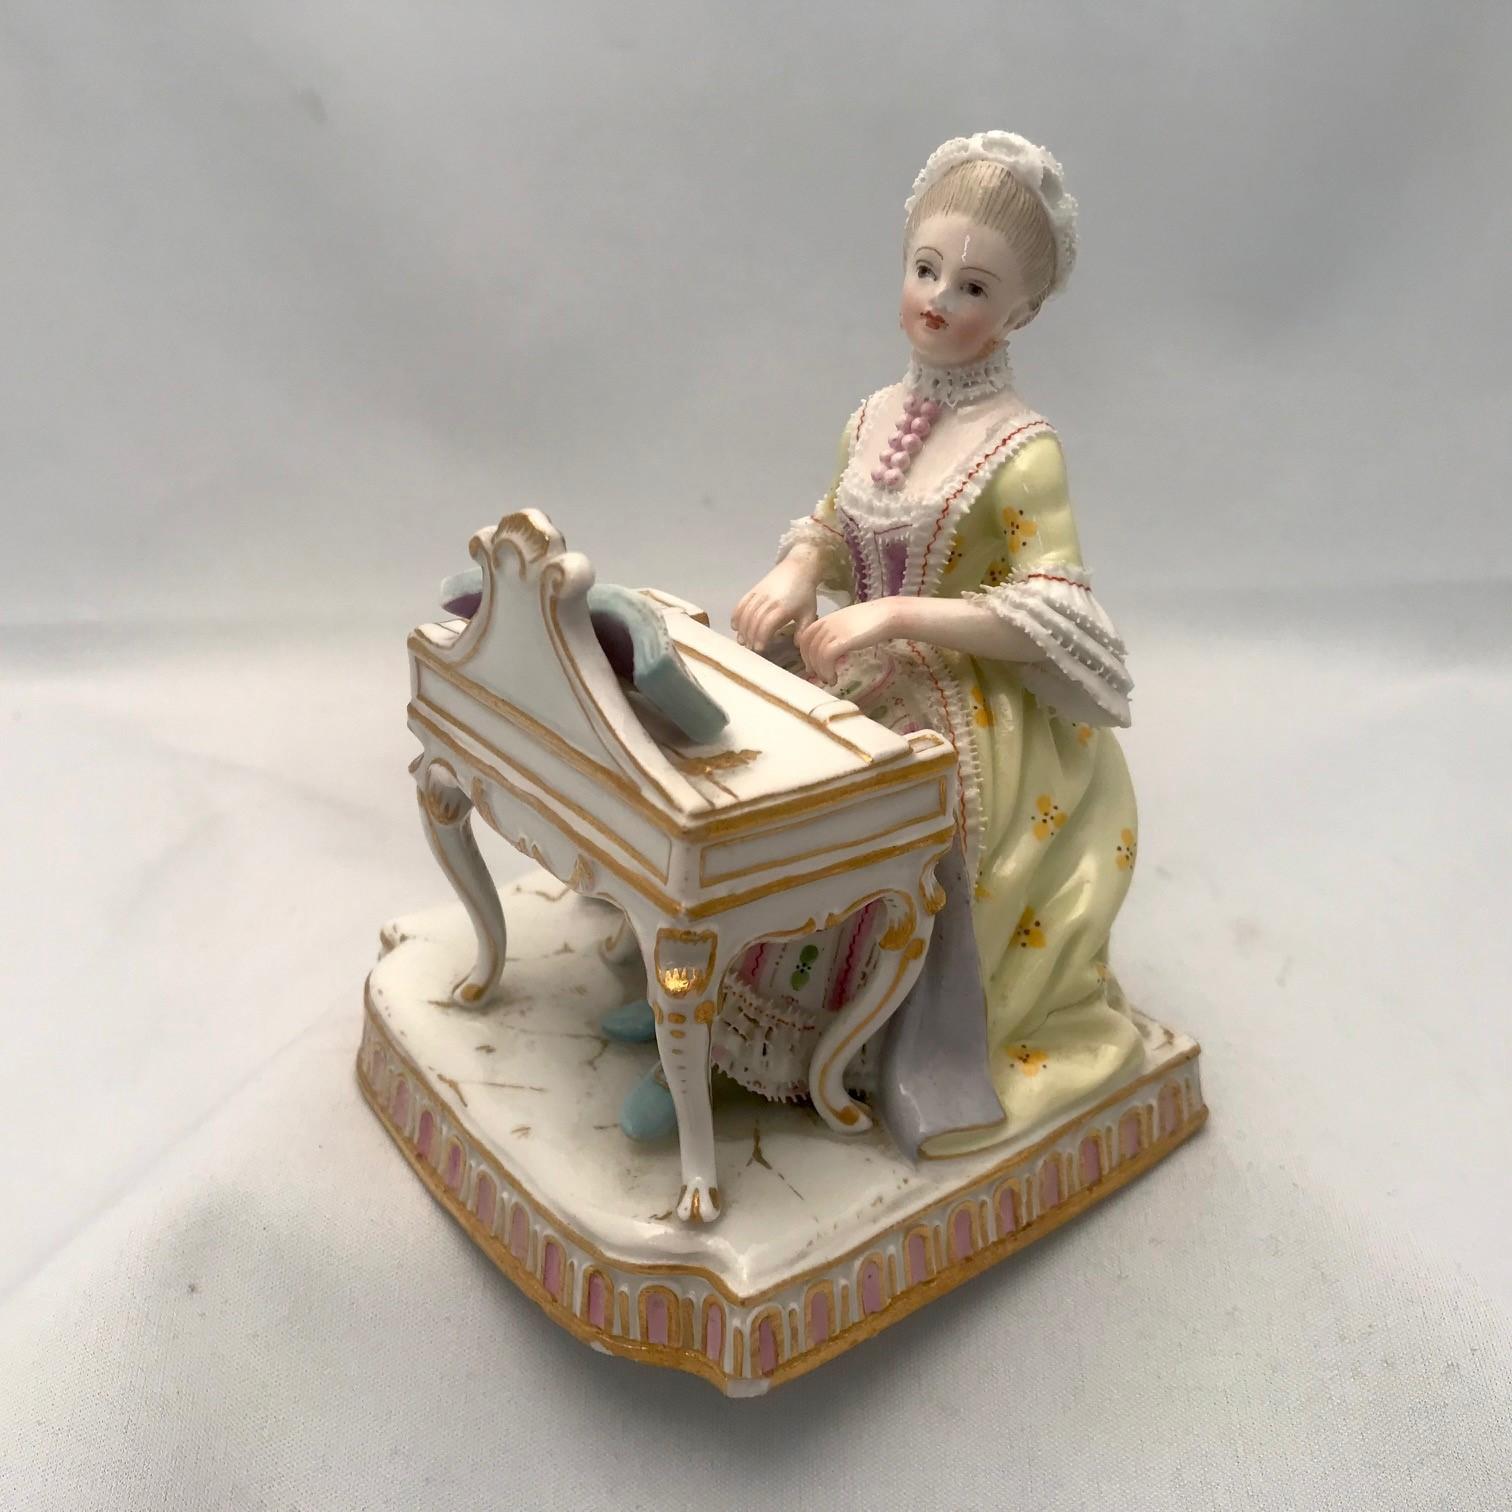 This finely modelled antique porcelain figure is one of a group called 